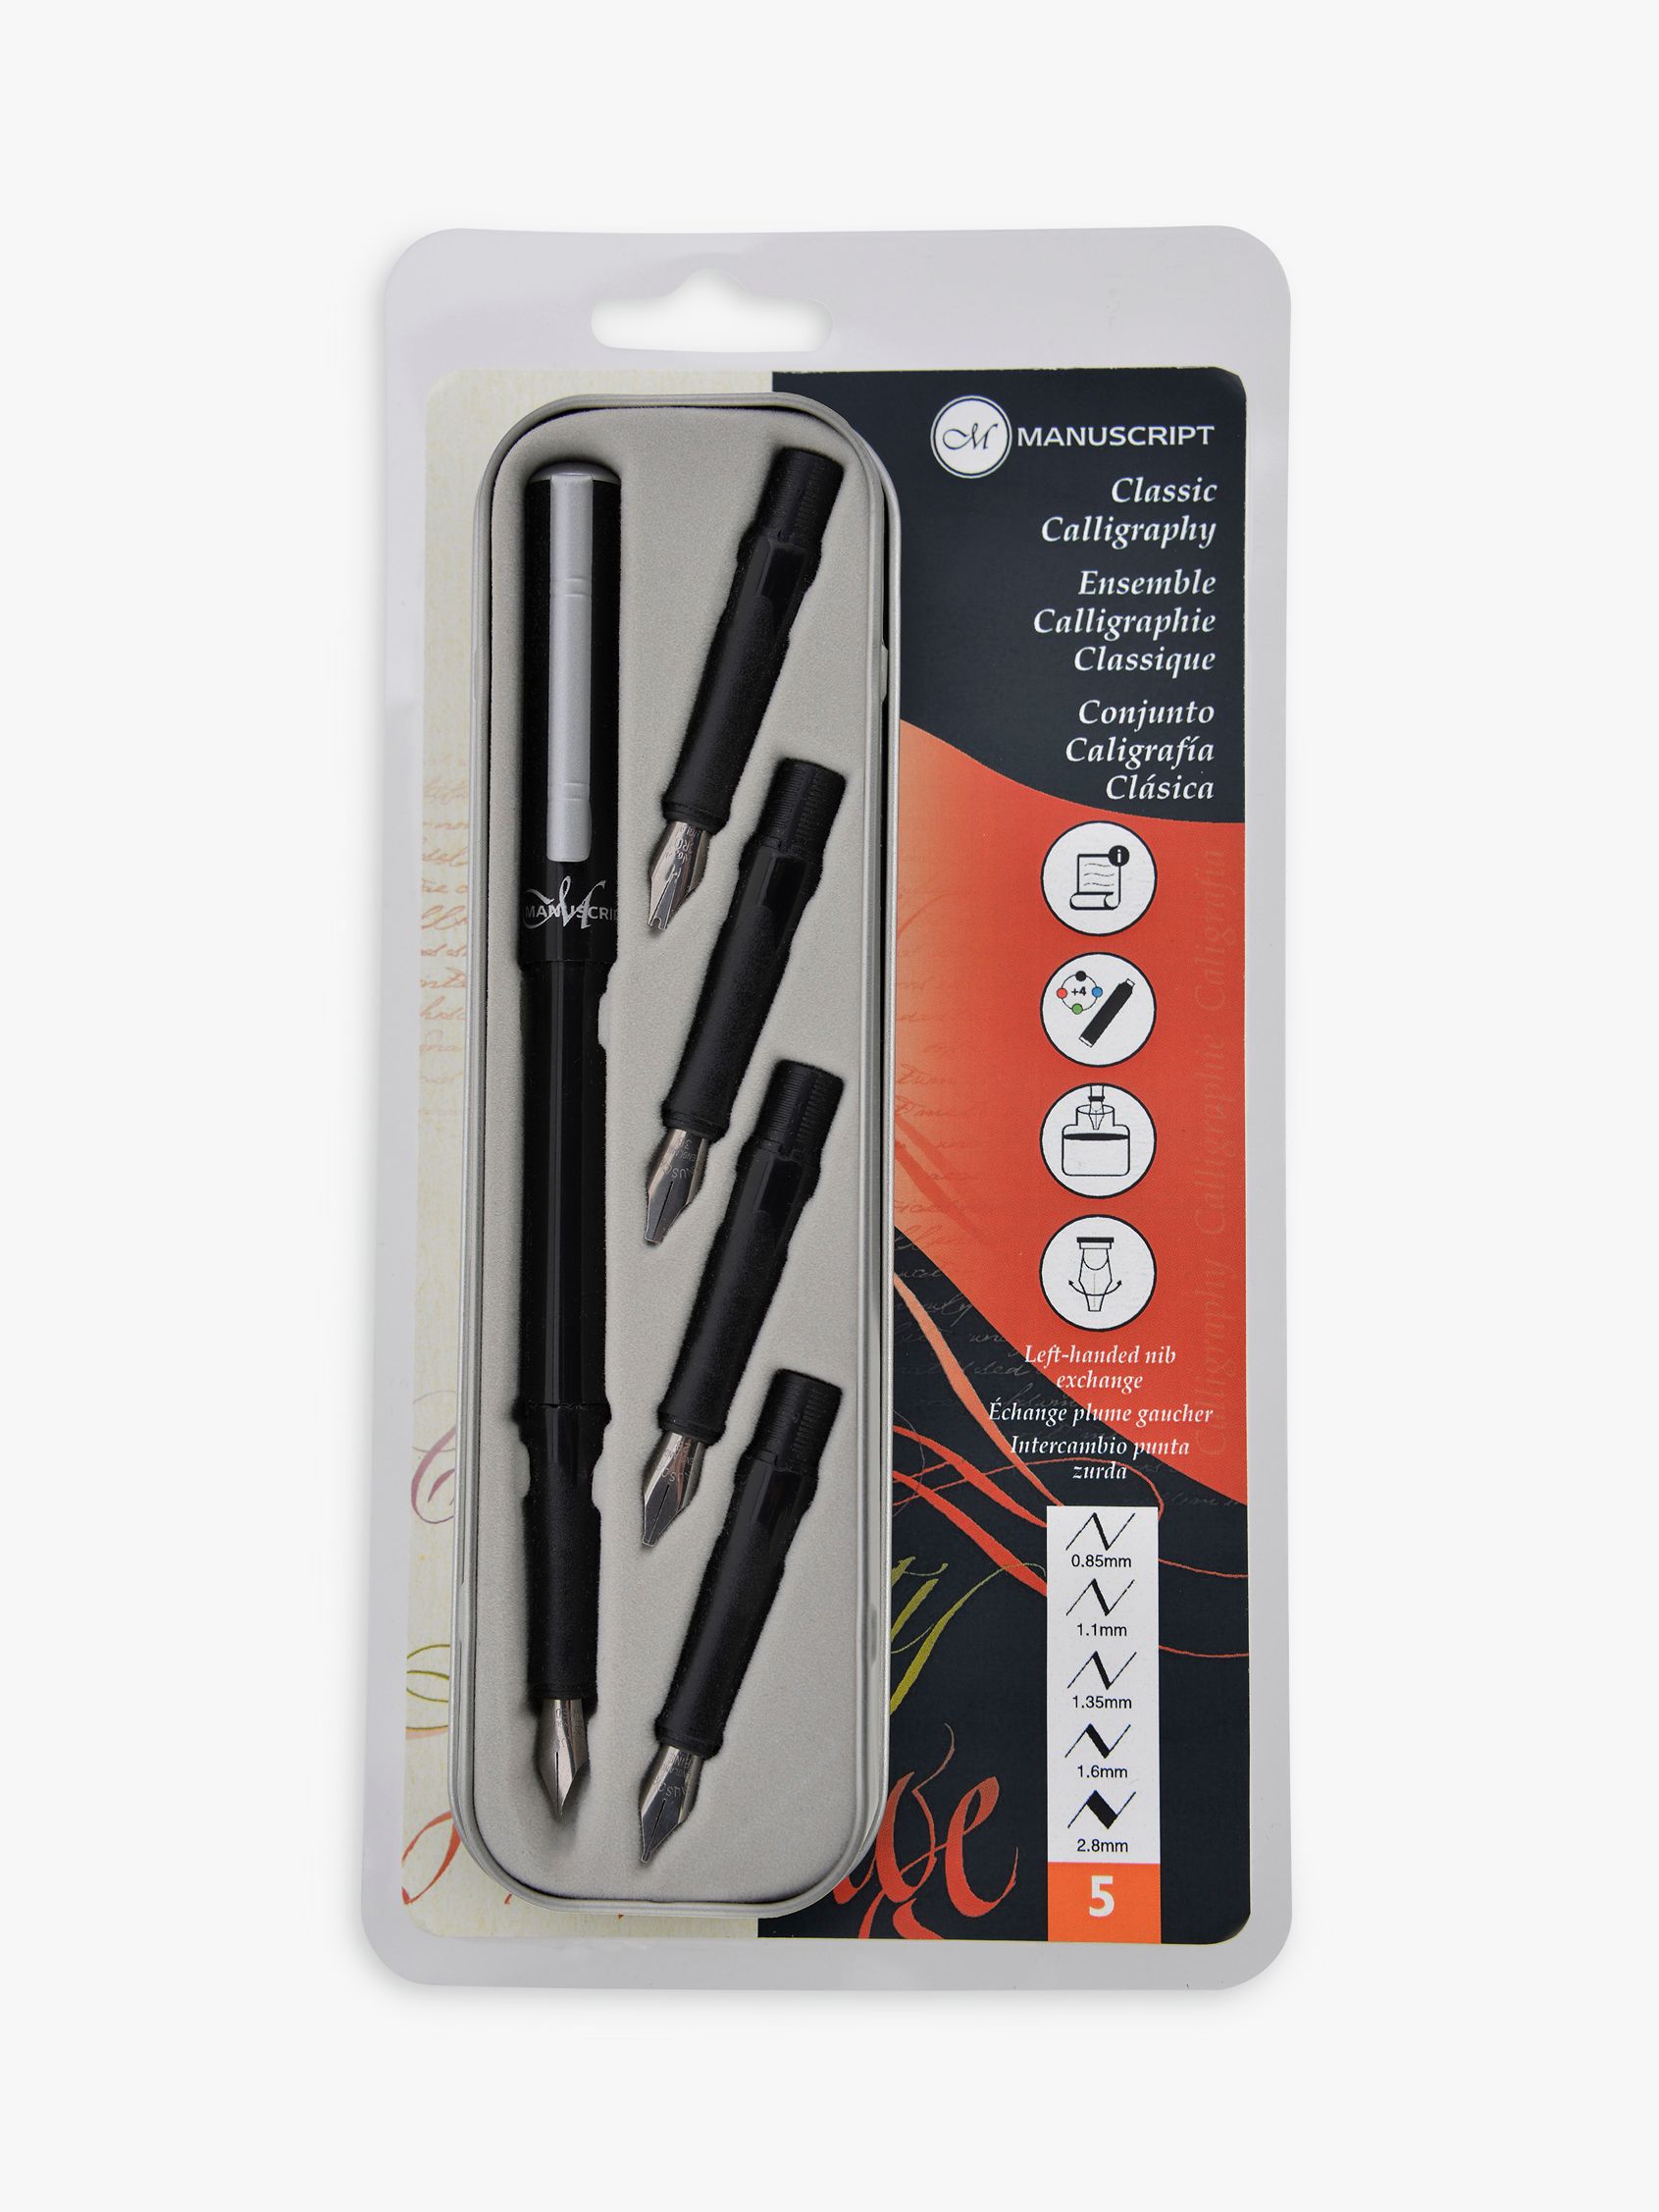 Manuscript Classic Calligraphy Pen with Nibs, Pack of 5